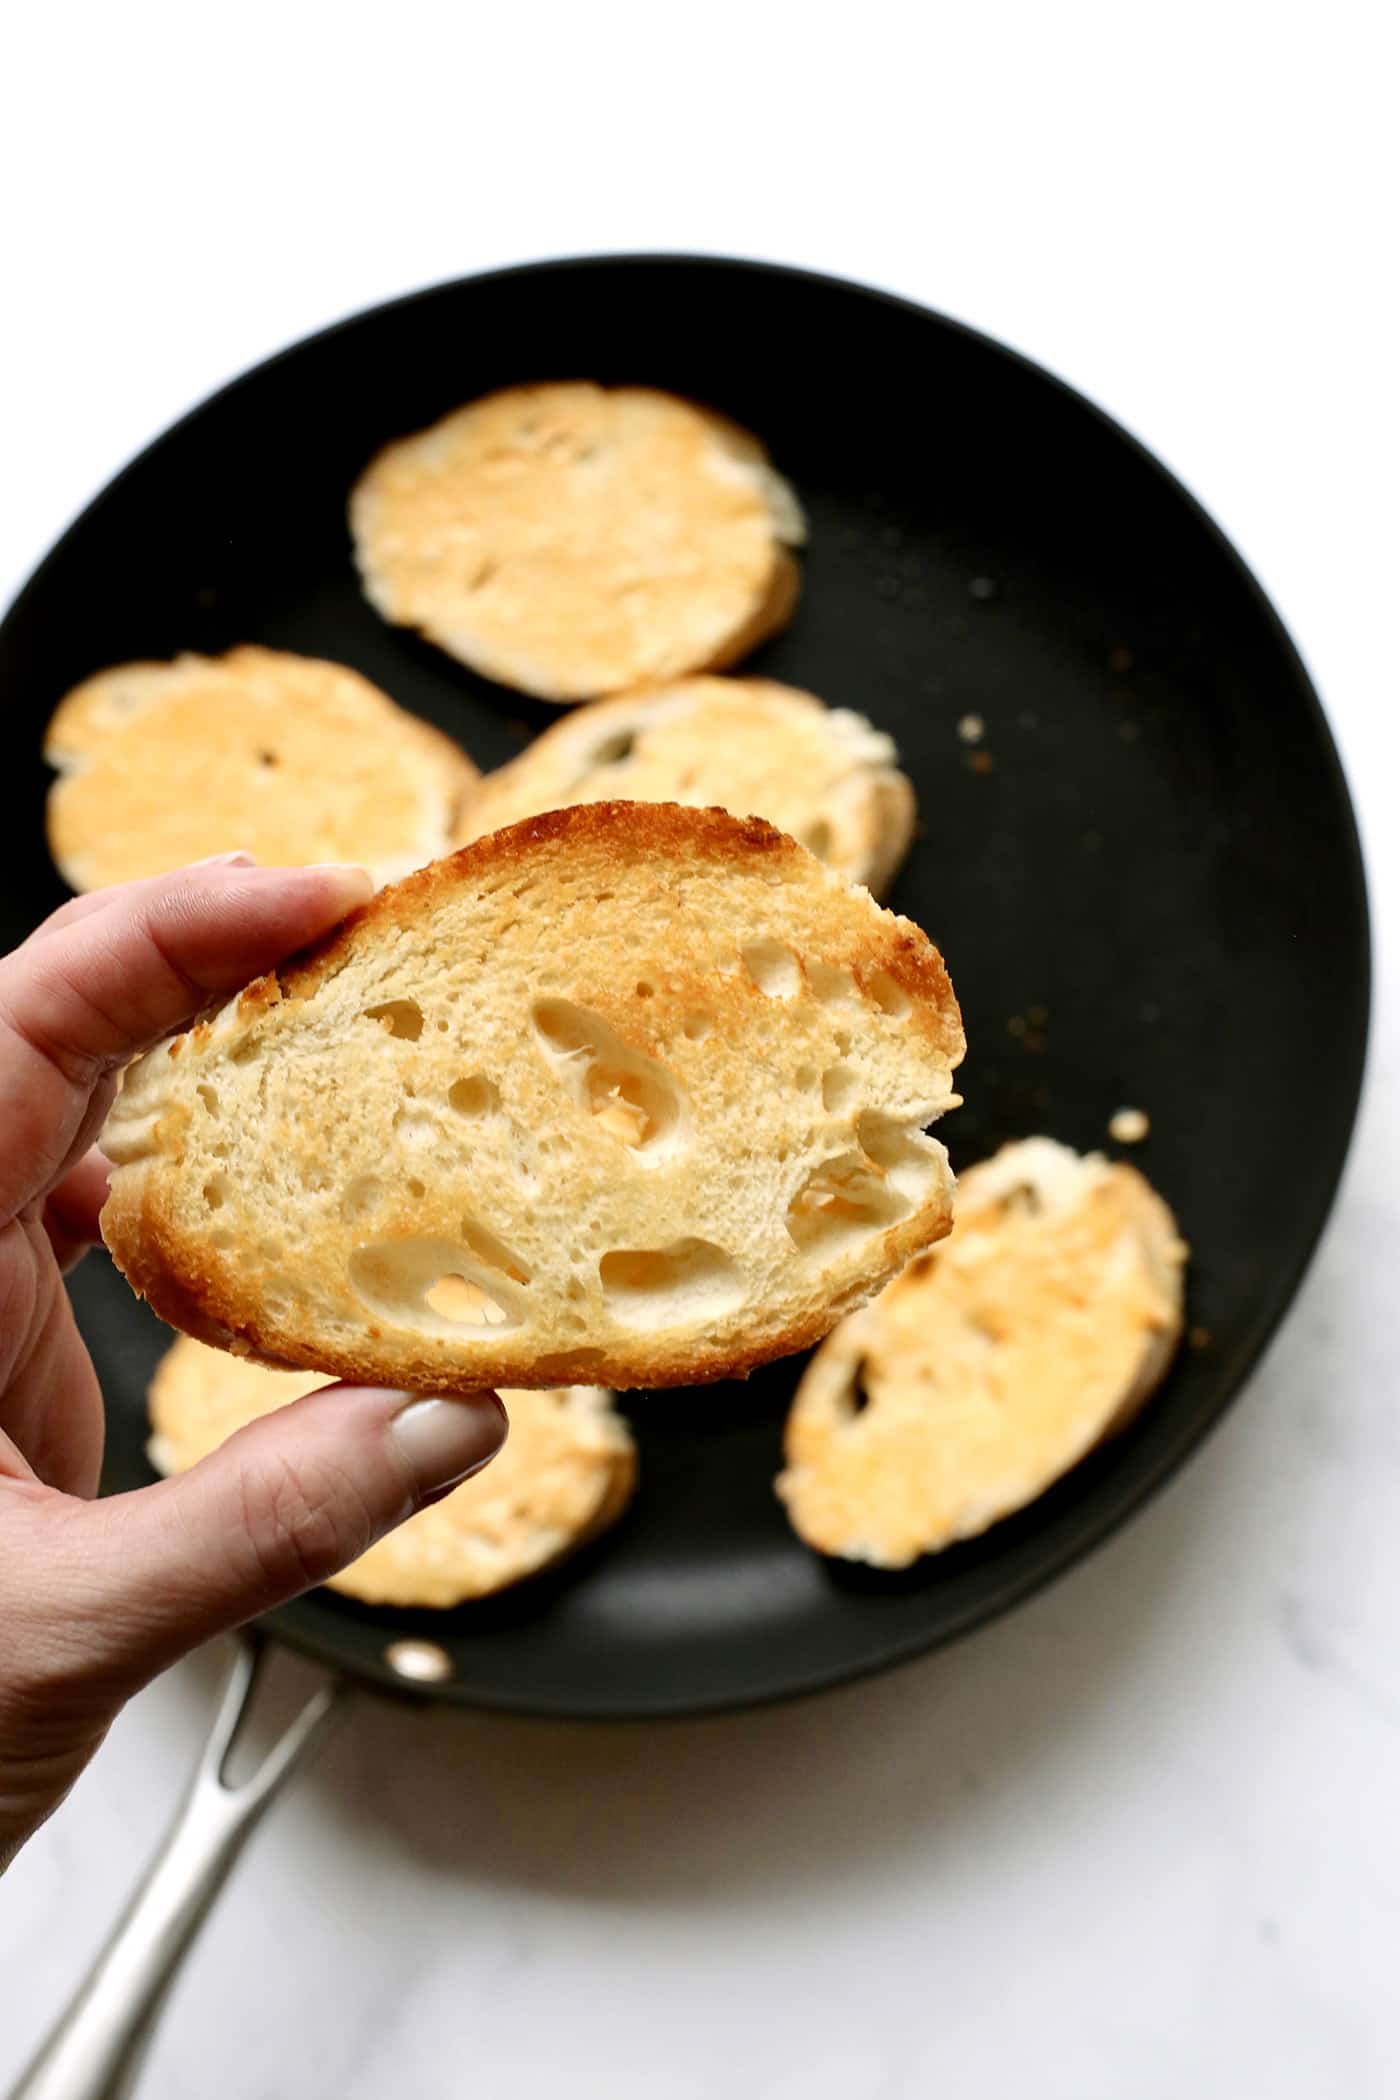 A hand holding a piece of toasted bread over a skillet